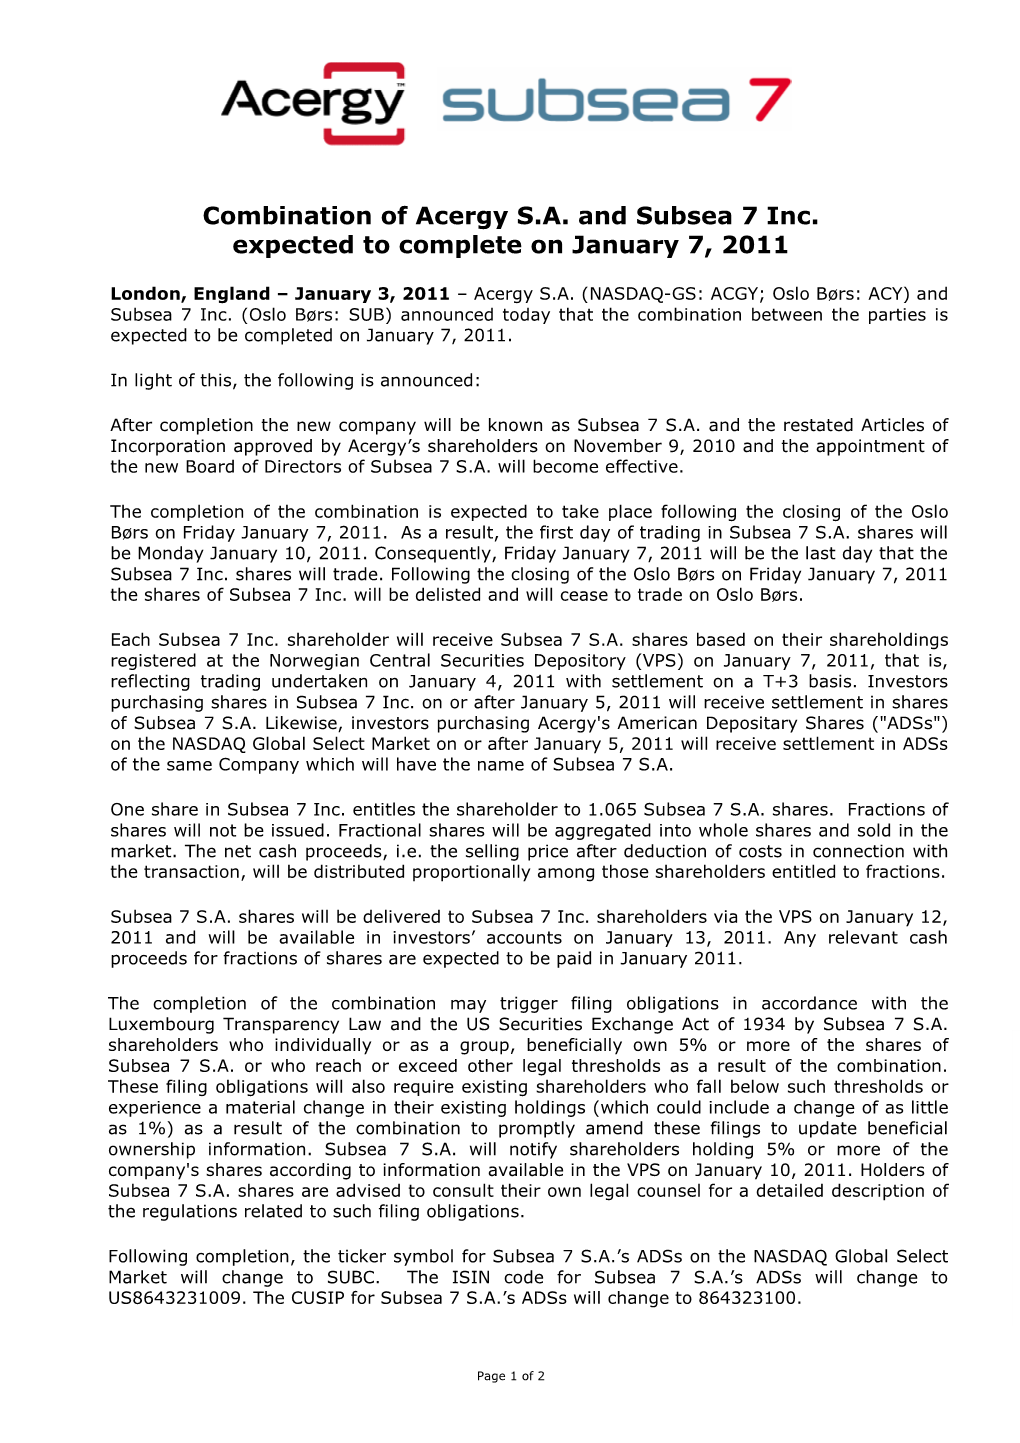 Combination of Acergy S.A. and Subsea 7 Inc. Expected to Complete on January 7, 2011